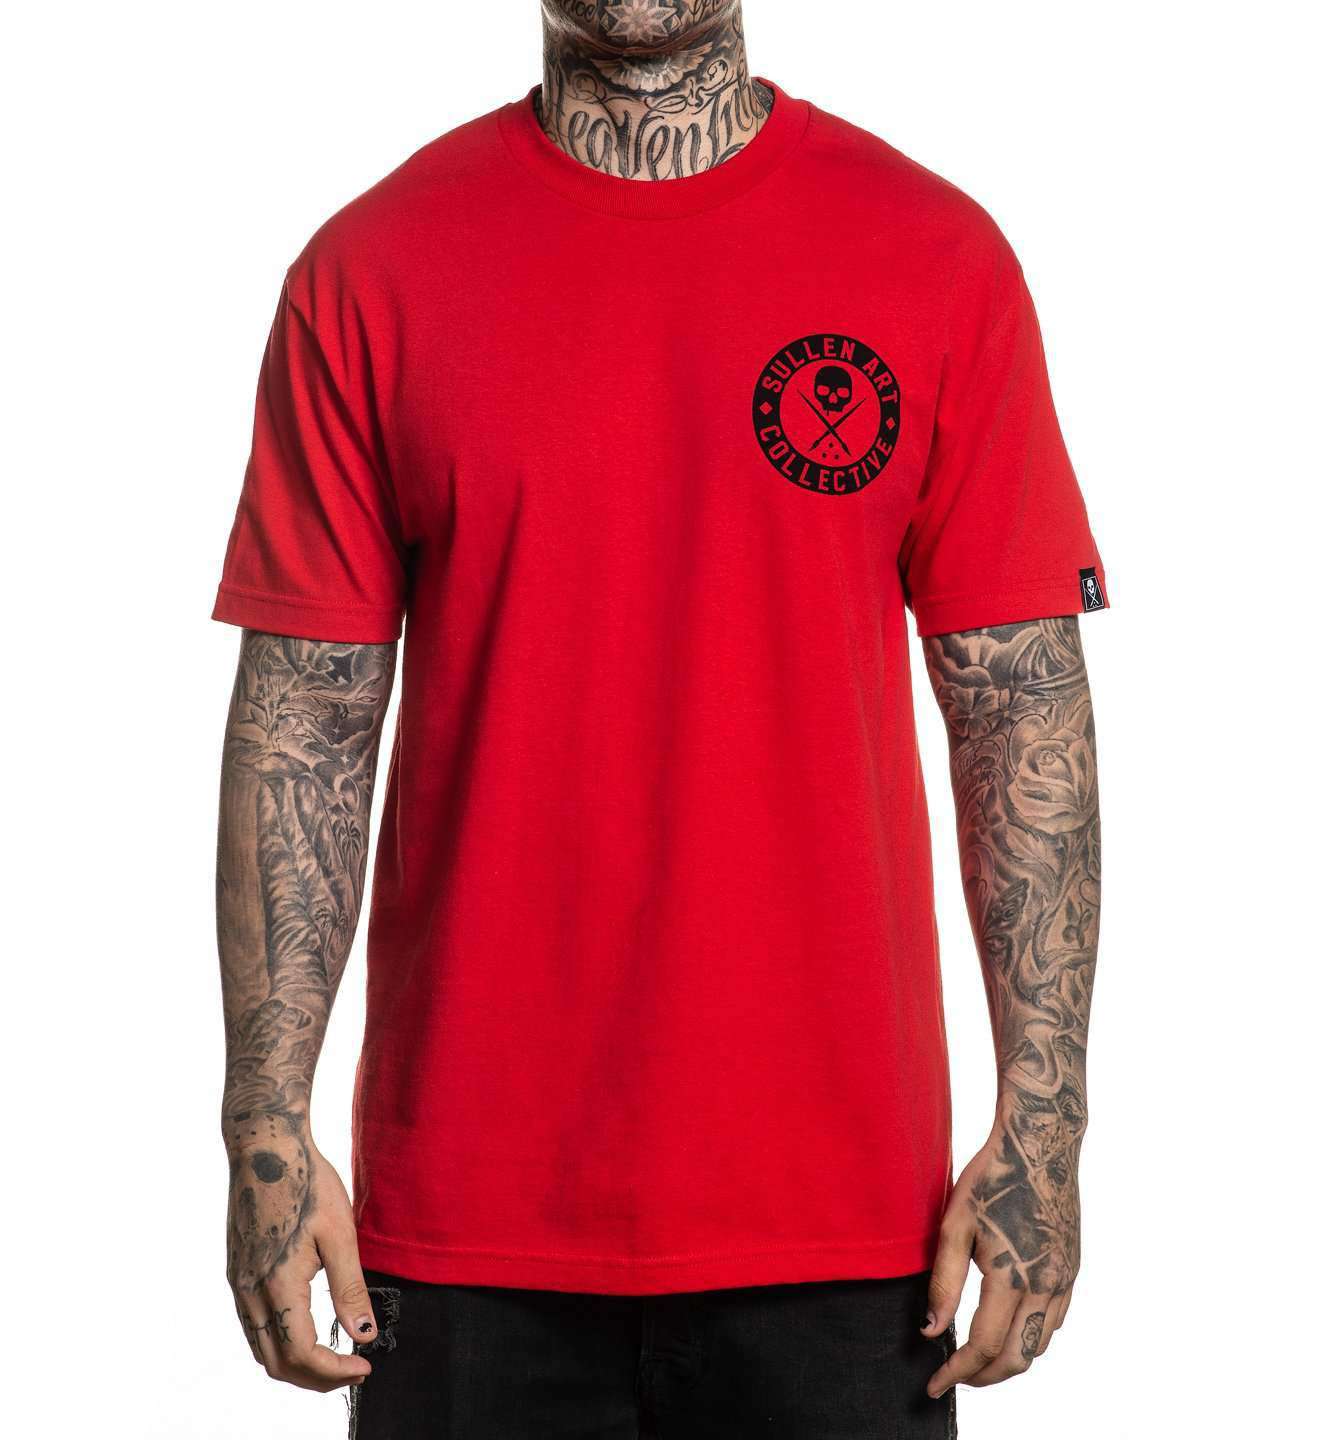 SULLEN CLOTHING CLASSIC BADGE STANDARD RED T-SHIRT